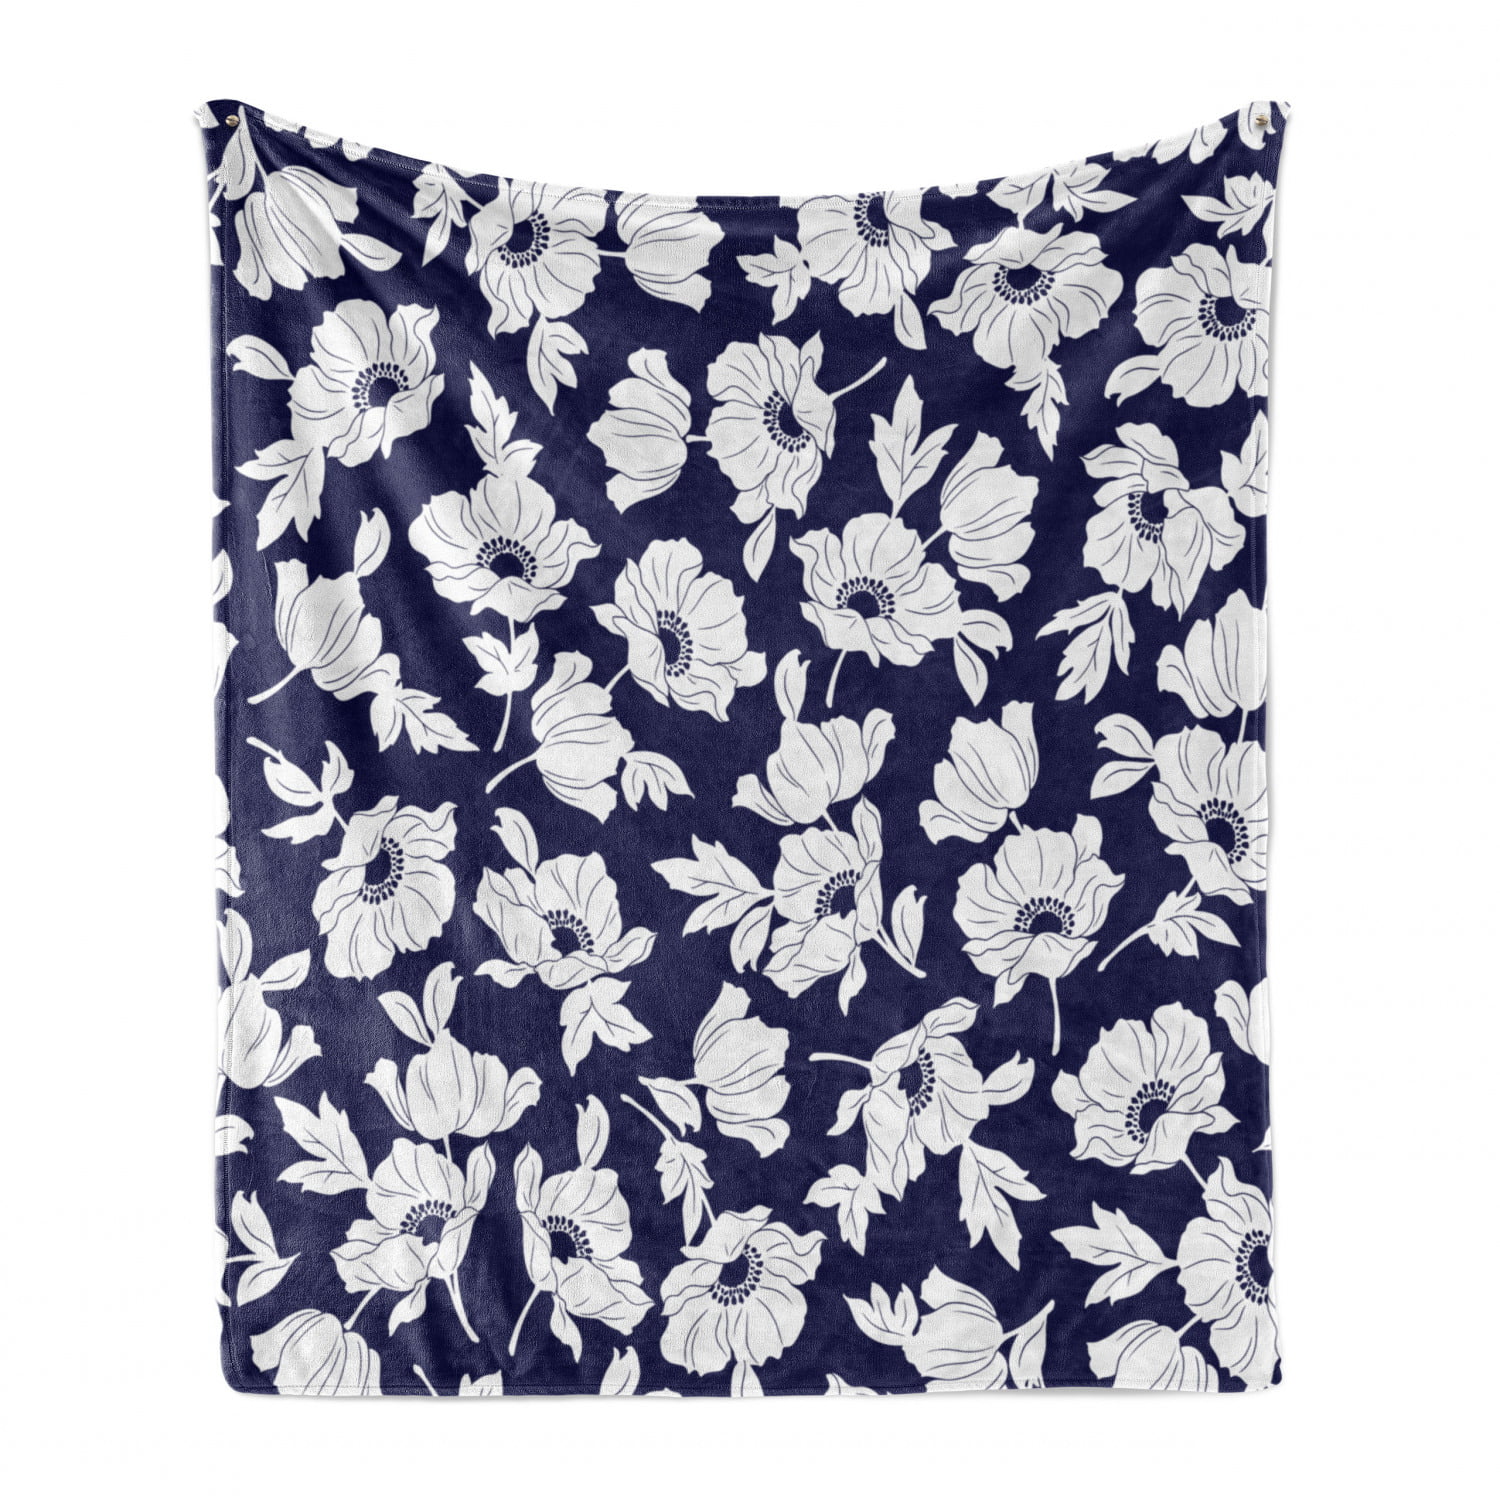 Flannel Fleece Accent Piece Soft Couch Cover for Adults Botanical Arrangement in Hand Drawn Style Spring Themed Nostalgic Nature 50 x 60 Slate Blue and White Ambesonne Flower Throw Blanket